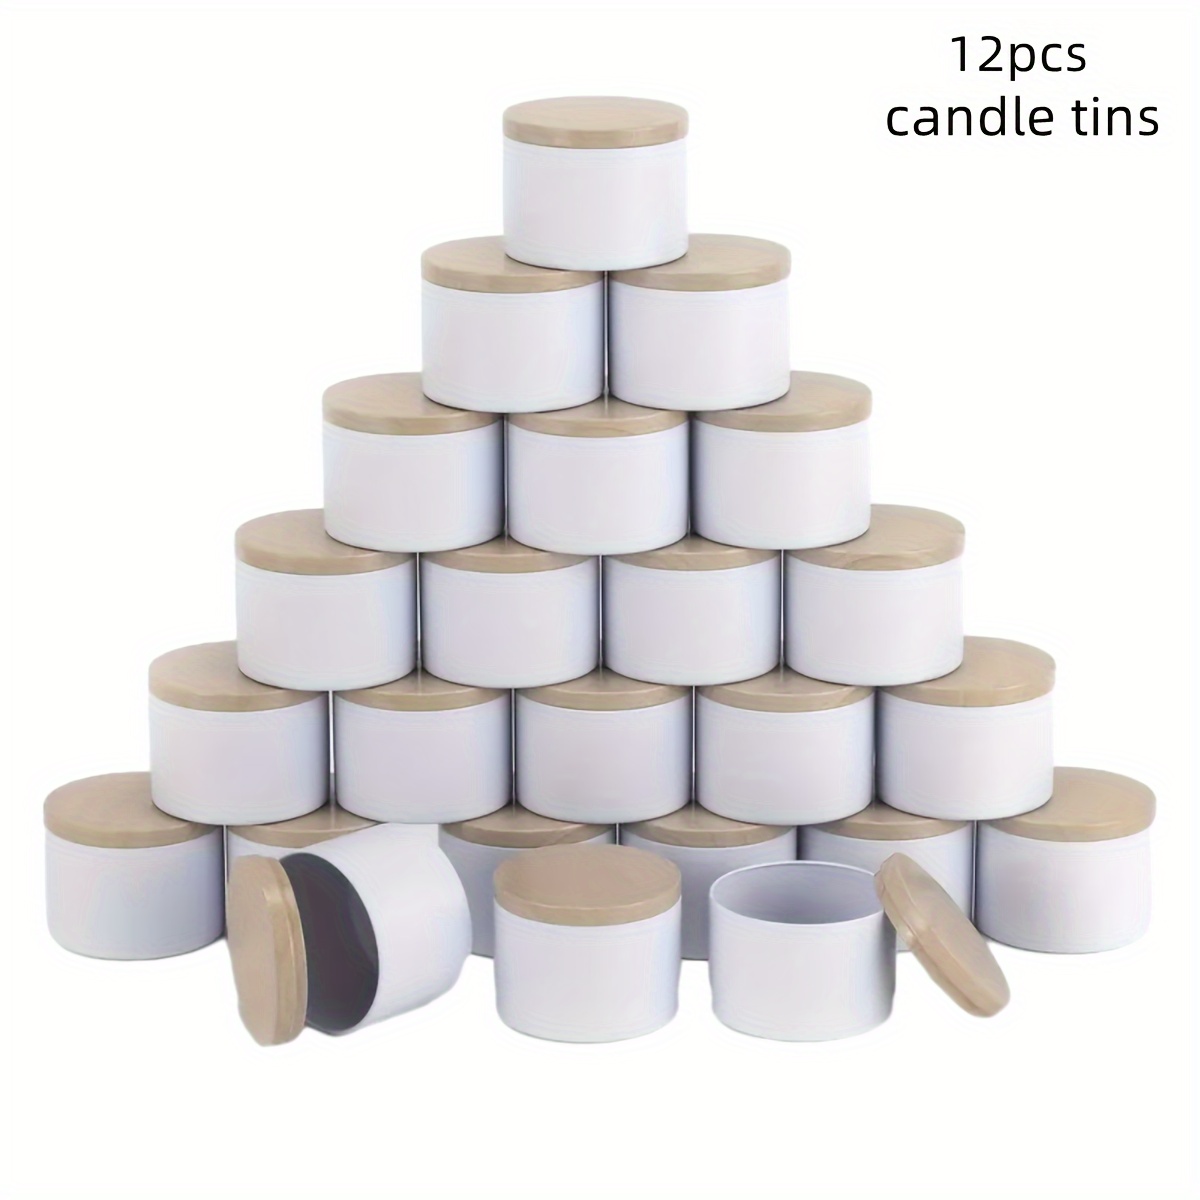 

12-pack White Metal Candle Tins With Lids, 4/8oz - Perfect For Diy Candle Making & Storage, Aroma Retention, Craft Supplies